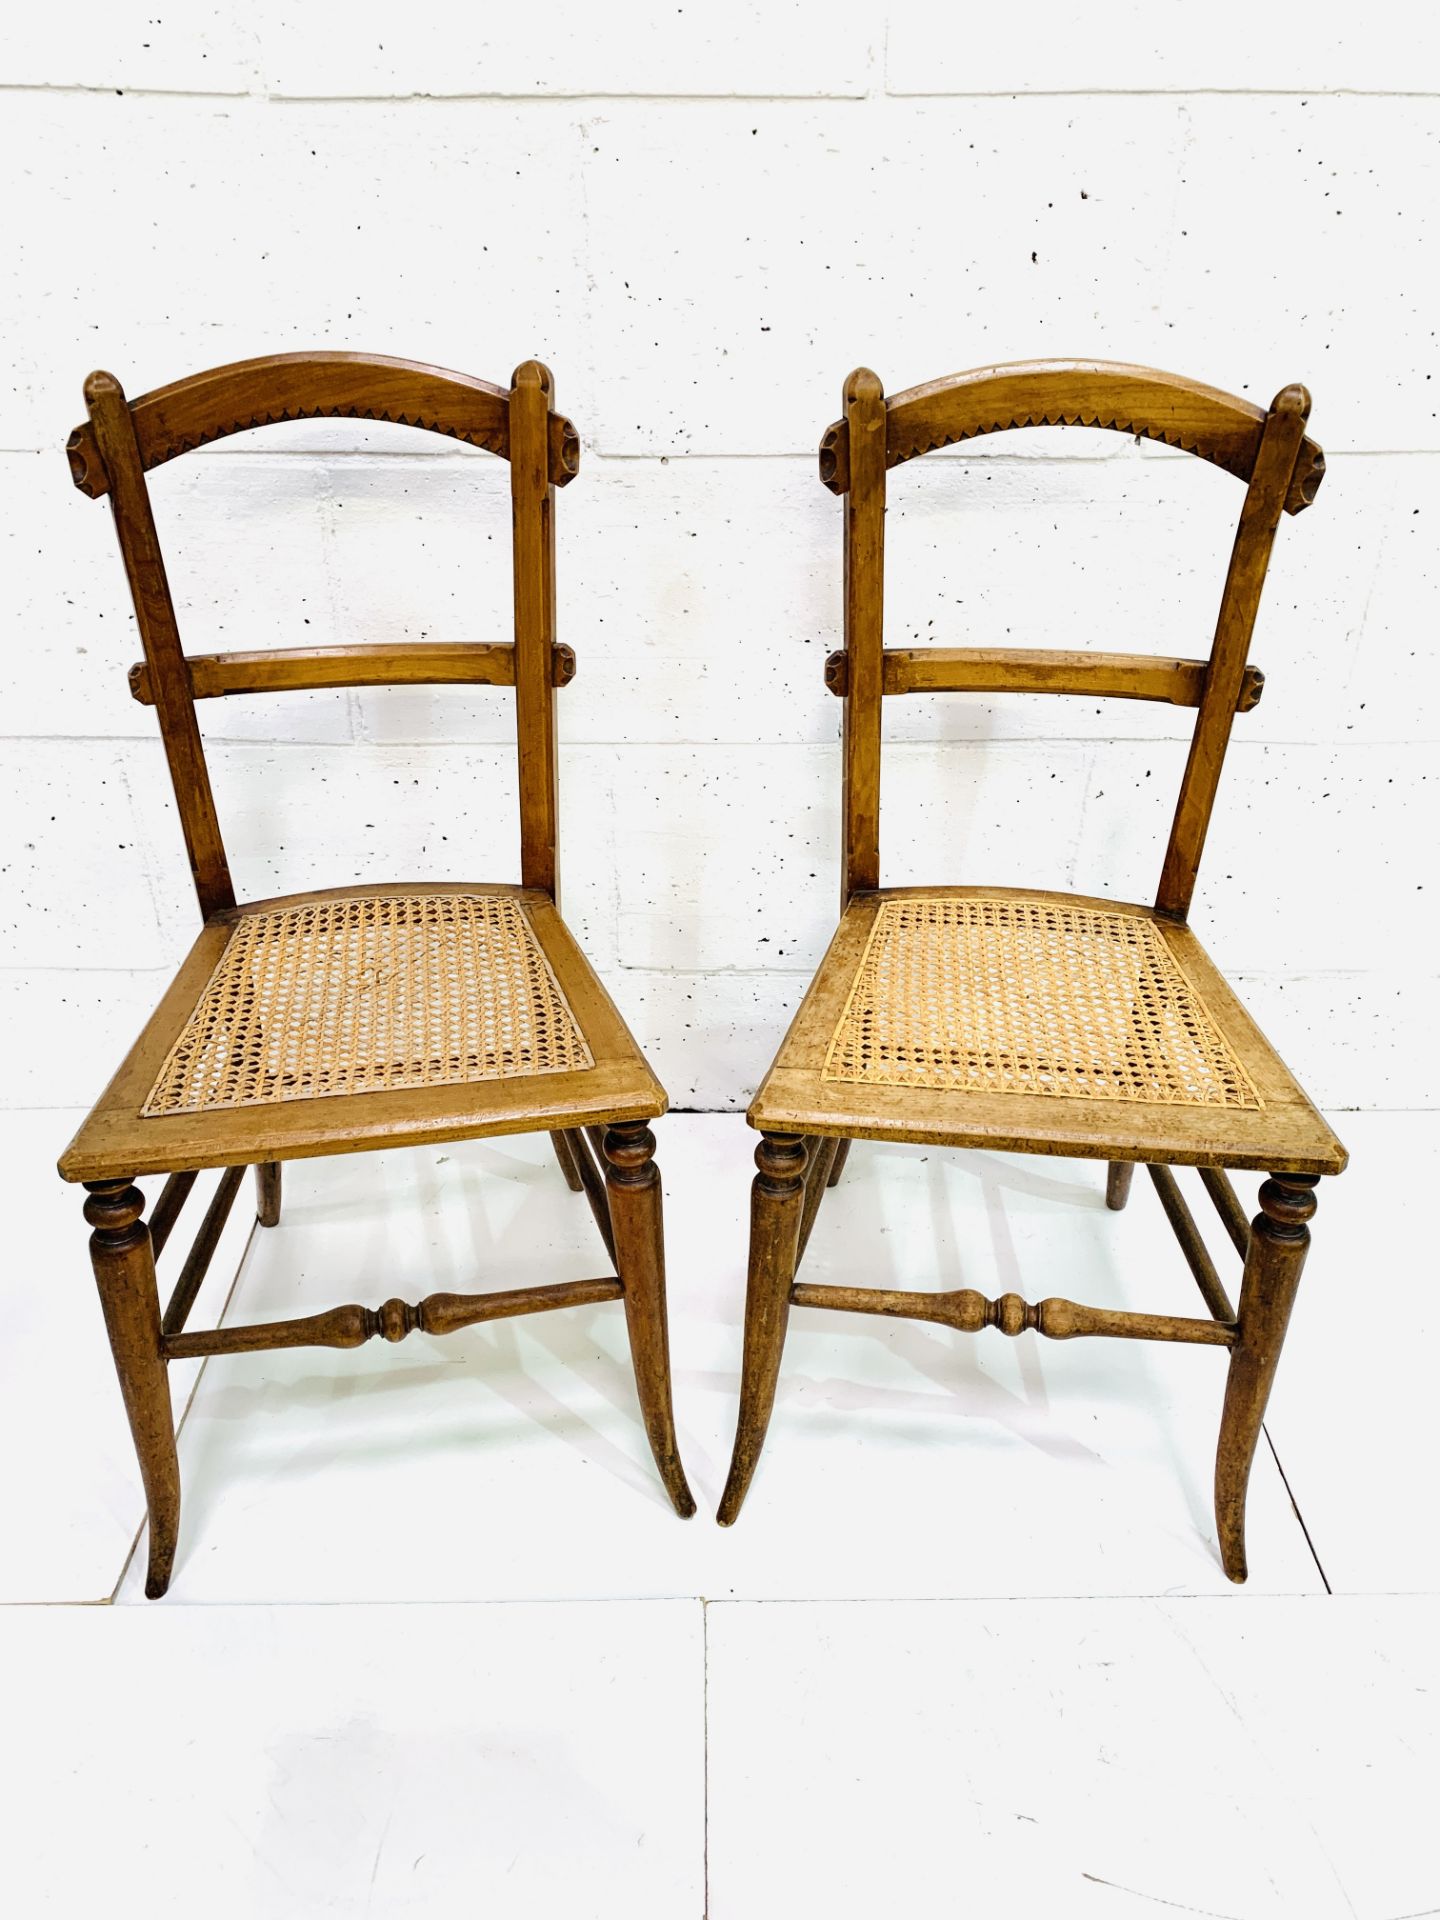 Pair of decorative cane seat arched back bedroom chairs